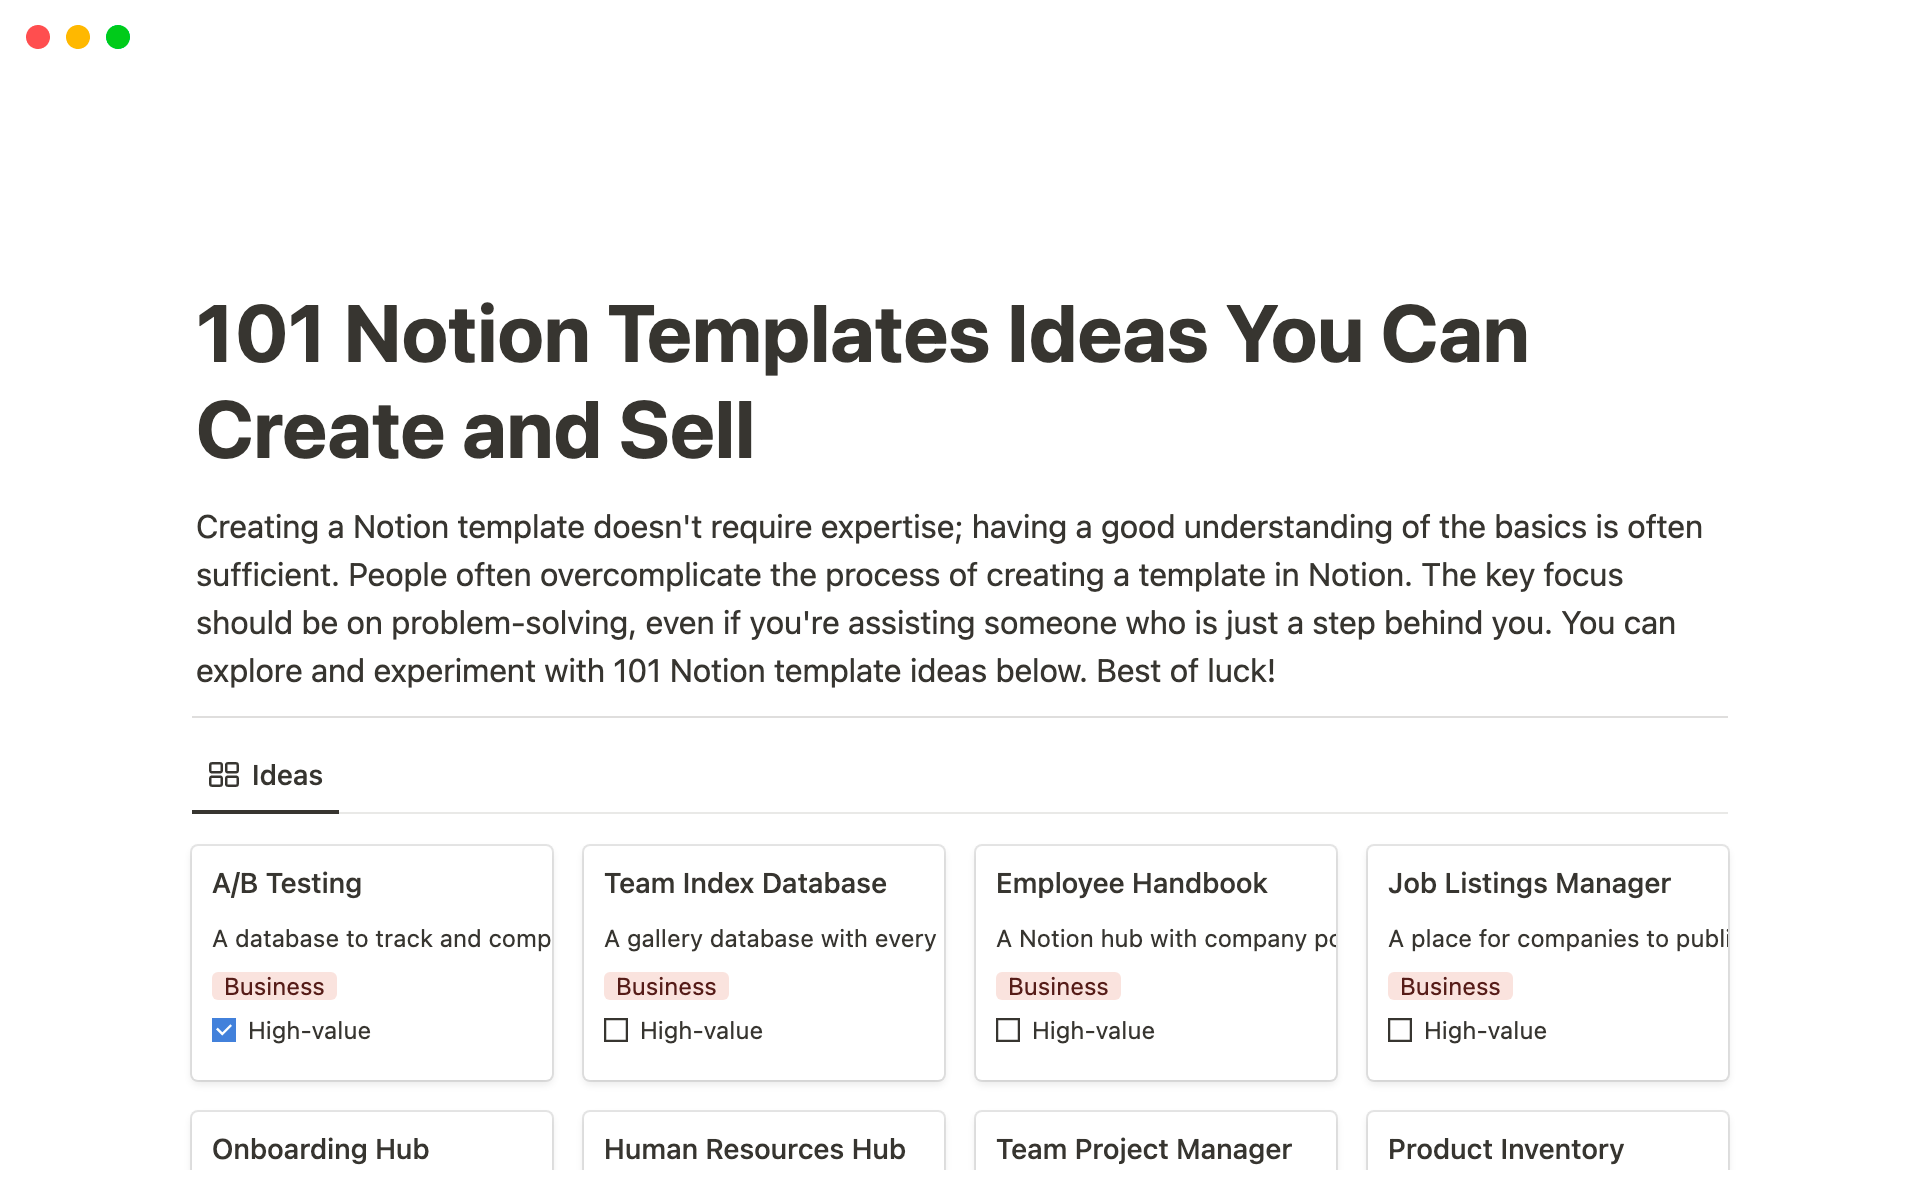 101 Notion Template Ideas You Can Create And Sellのテンプレートのプレビュー